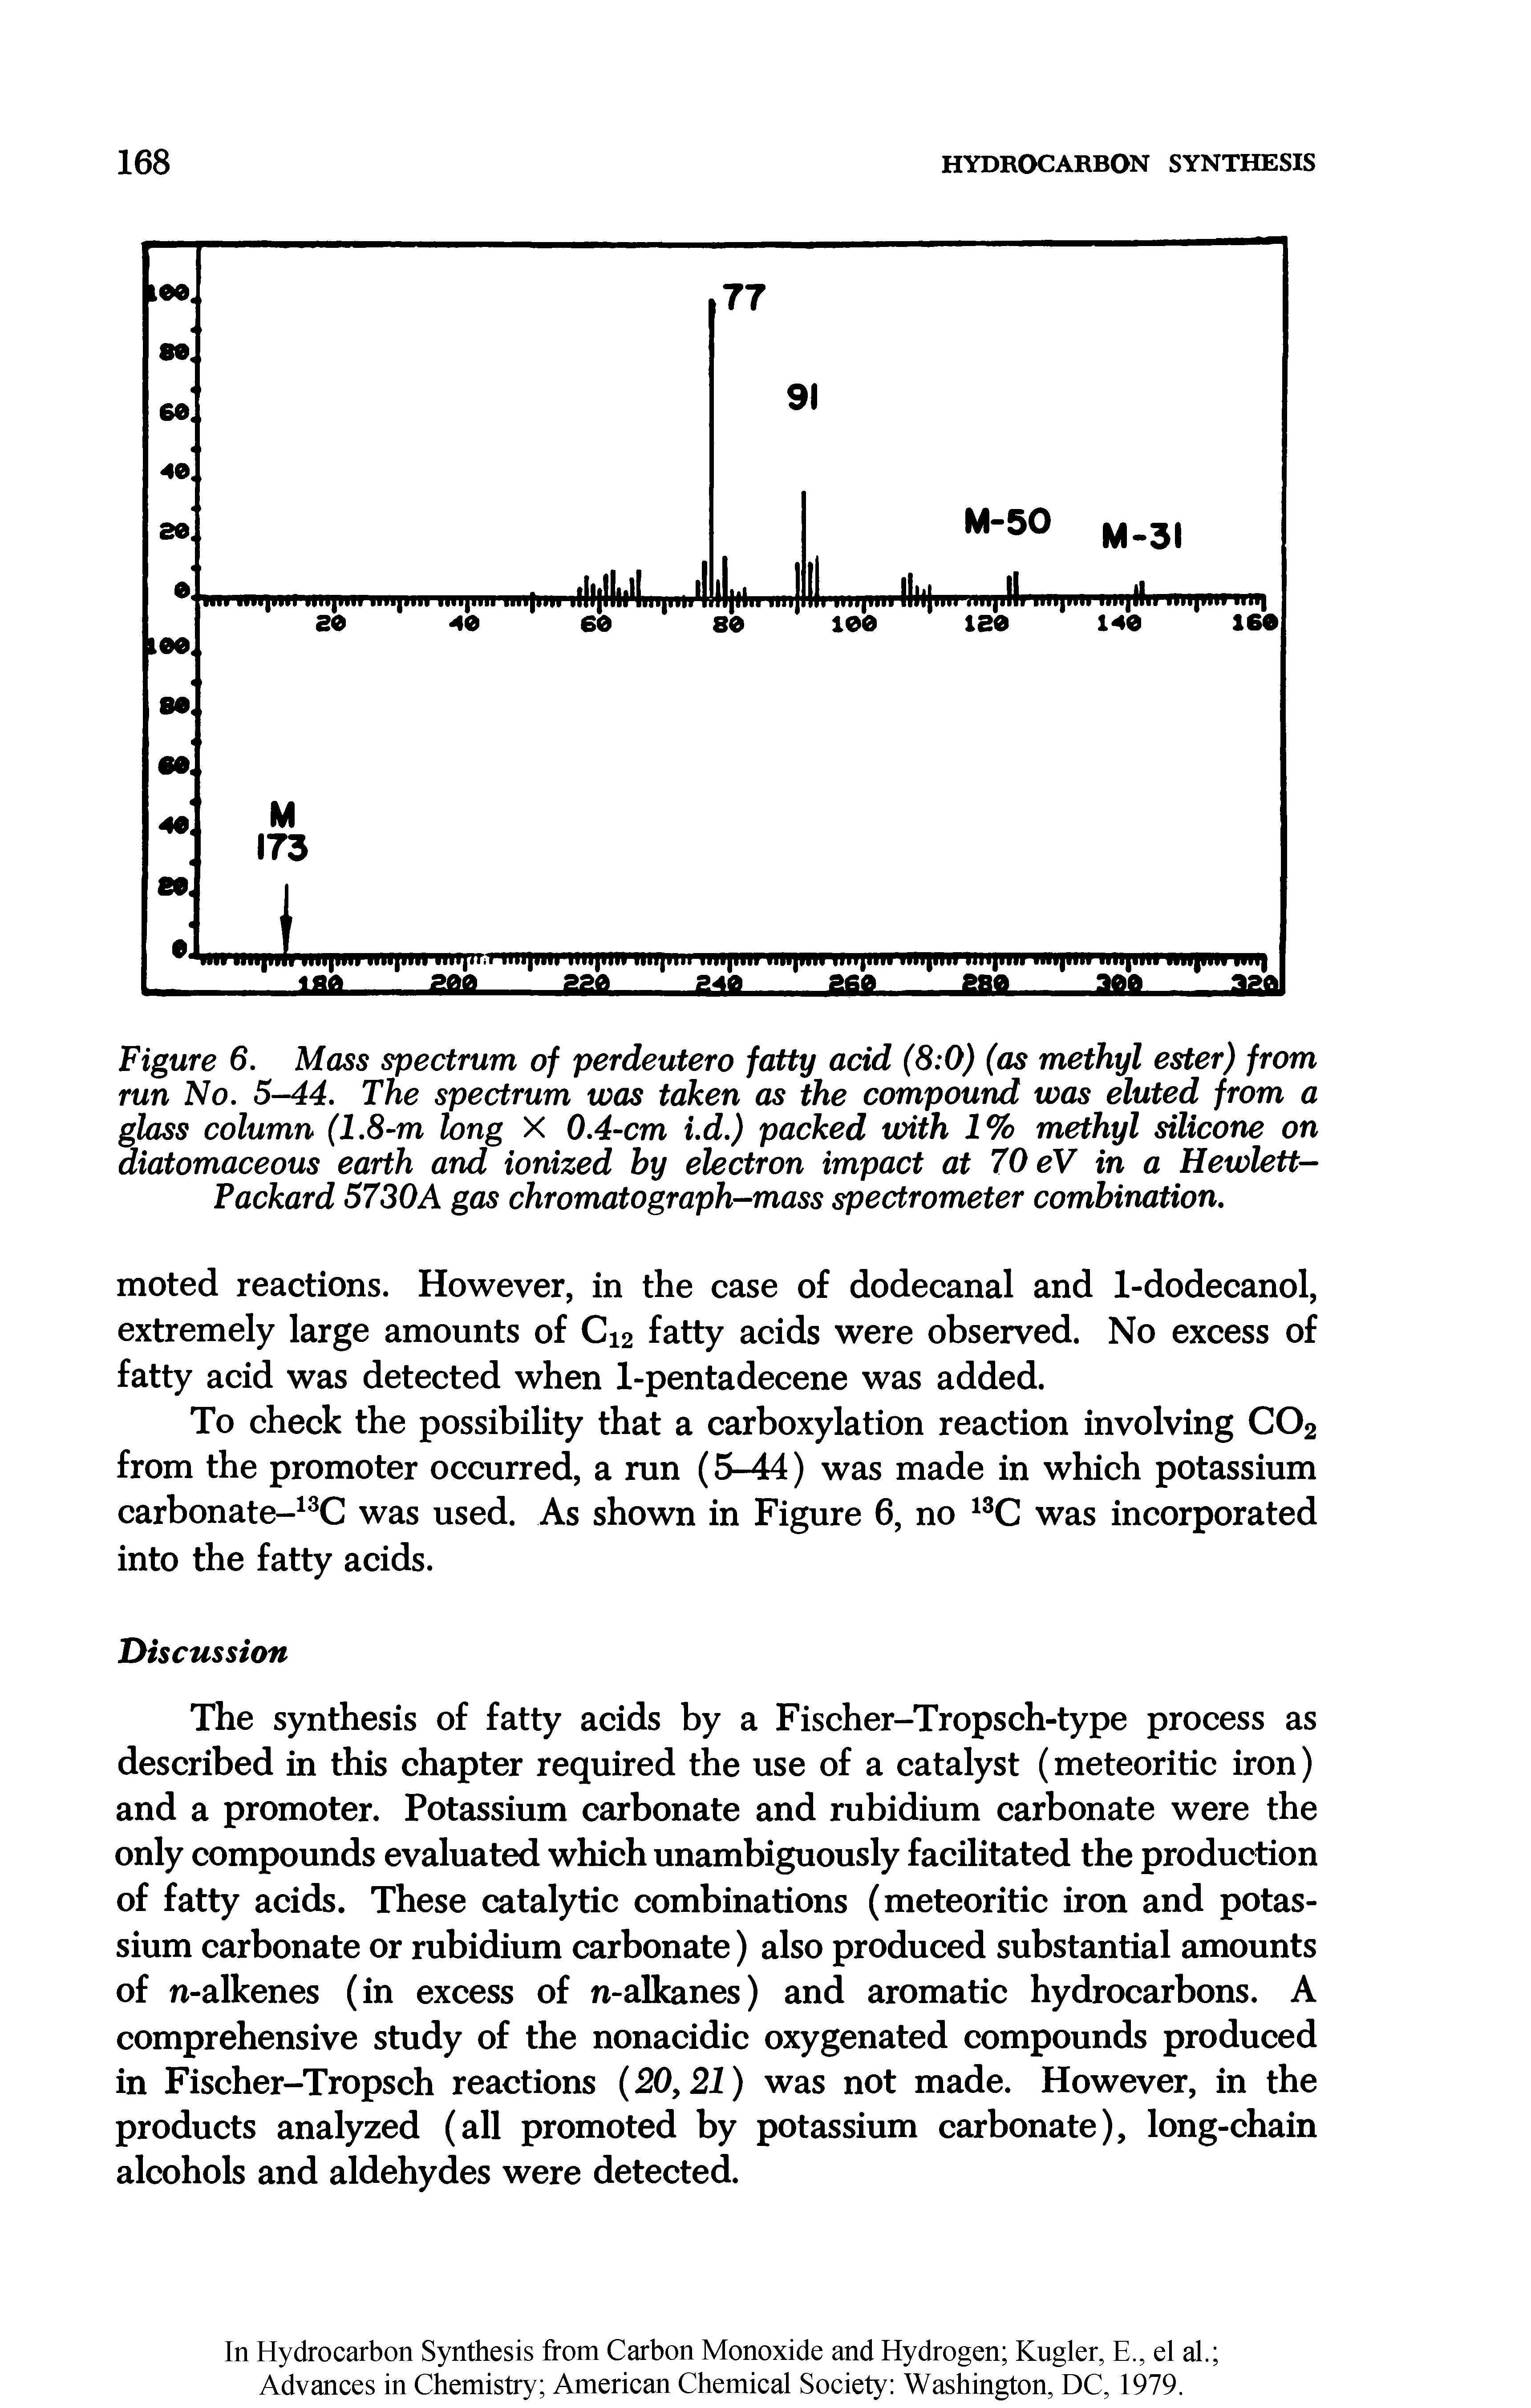 Figure 6. Mass spectrum of perdeutero fatty acid (8 0) (as methyl ester) from run No. 5-44. The spectrum was taken as the compound was eluted from a glass column (1.8 m long X 0.4-cm i.d.) packed with 1% methyl silicone on diatomaceous earth and ionized by electron impact at 70 eV in a Hewlett-Packard 5730A gas chromatograph-mass spectrometer combination.